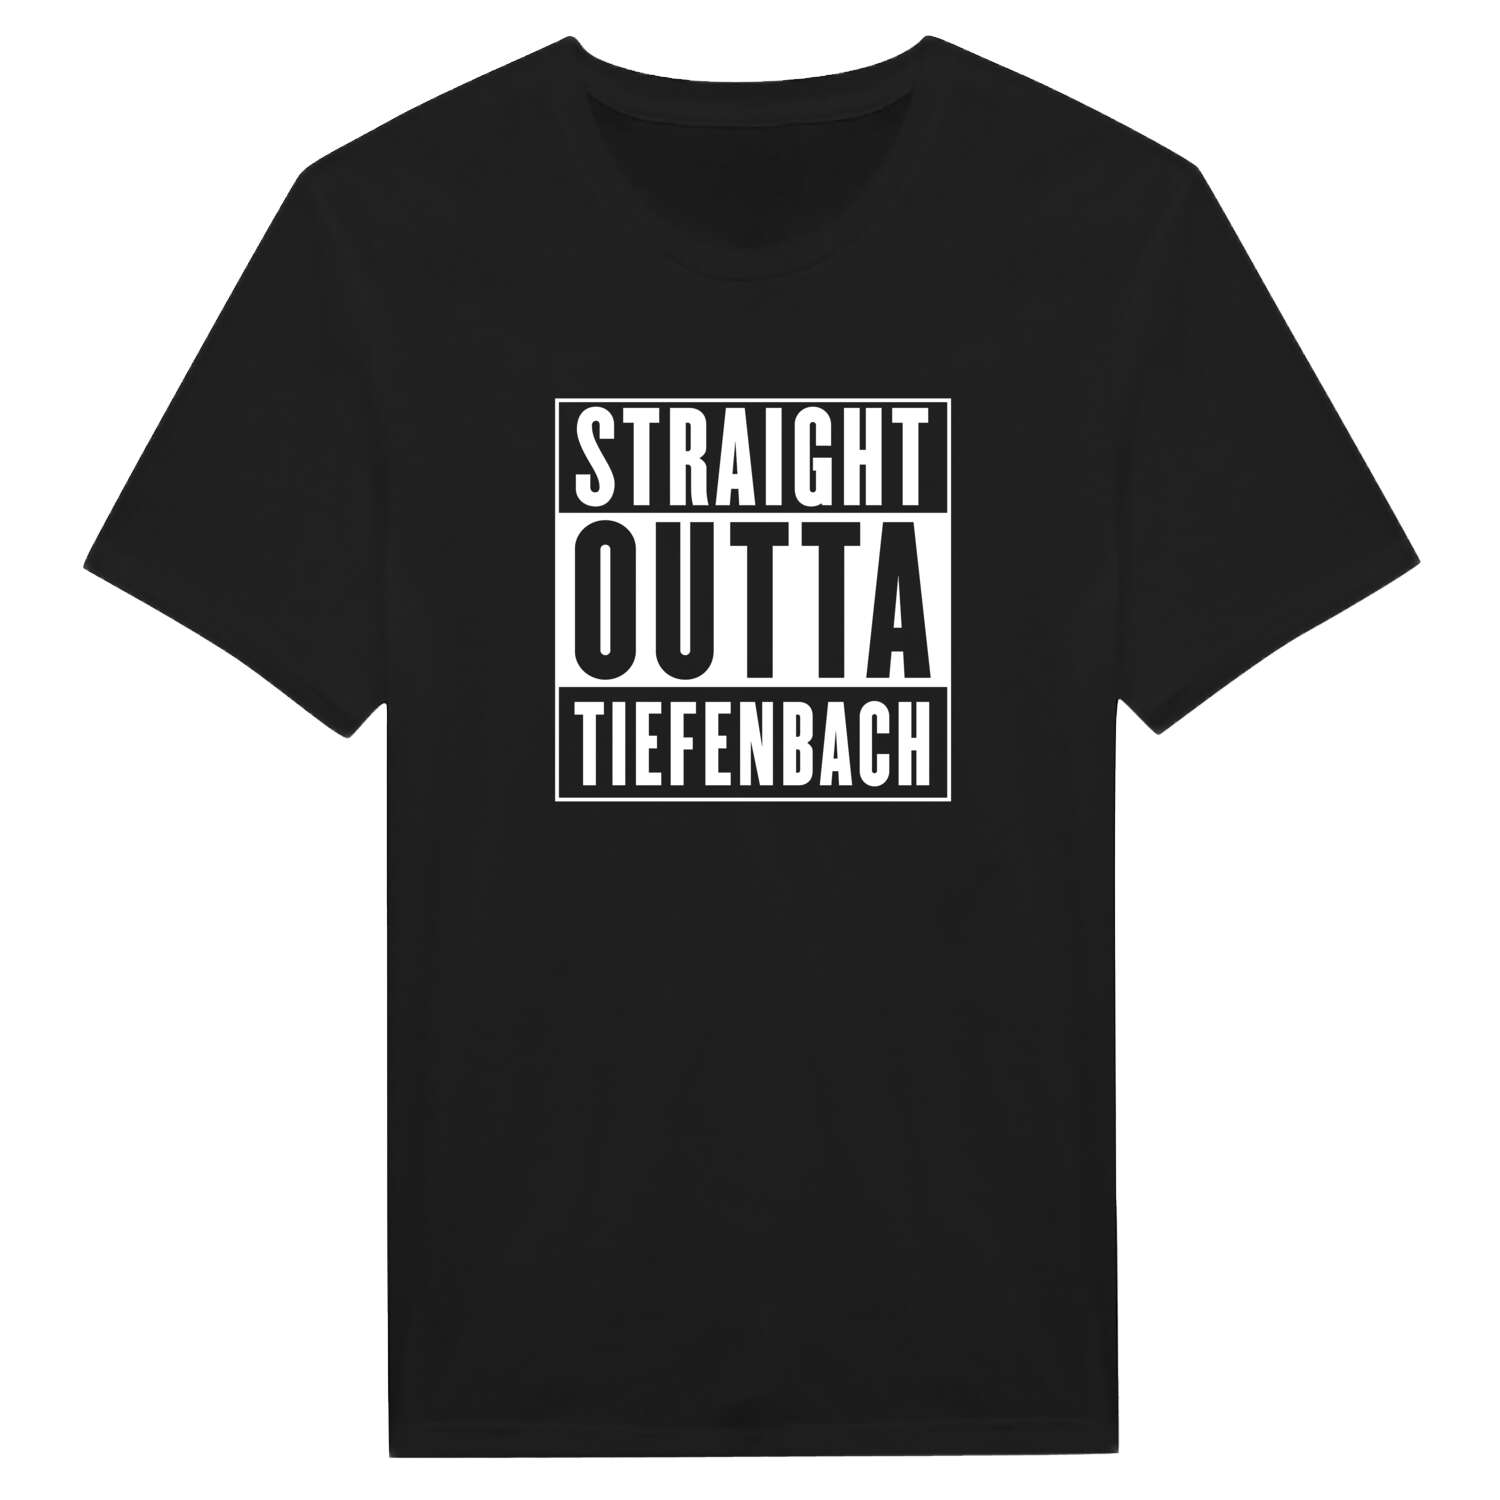 Tiefenbach T-Shirt »Straight Outta«